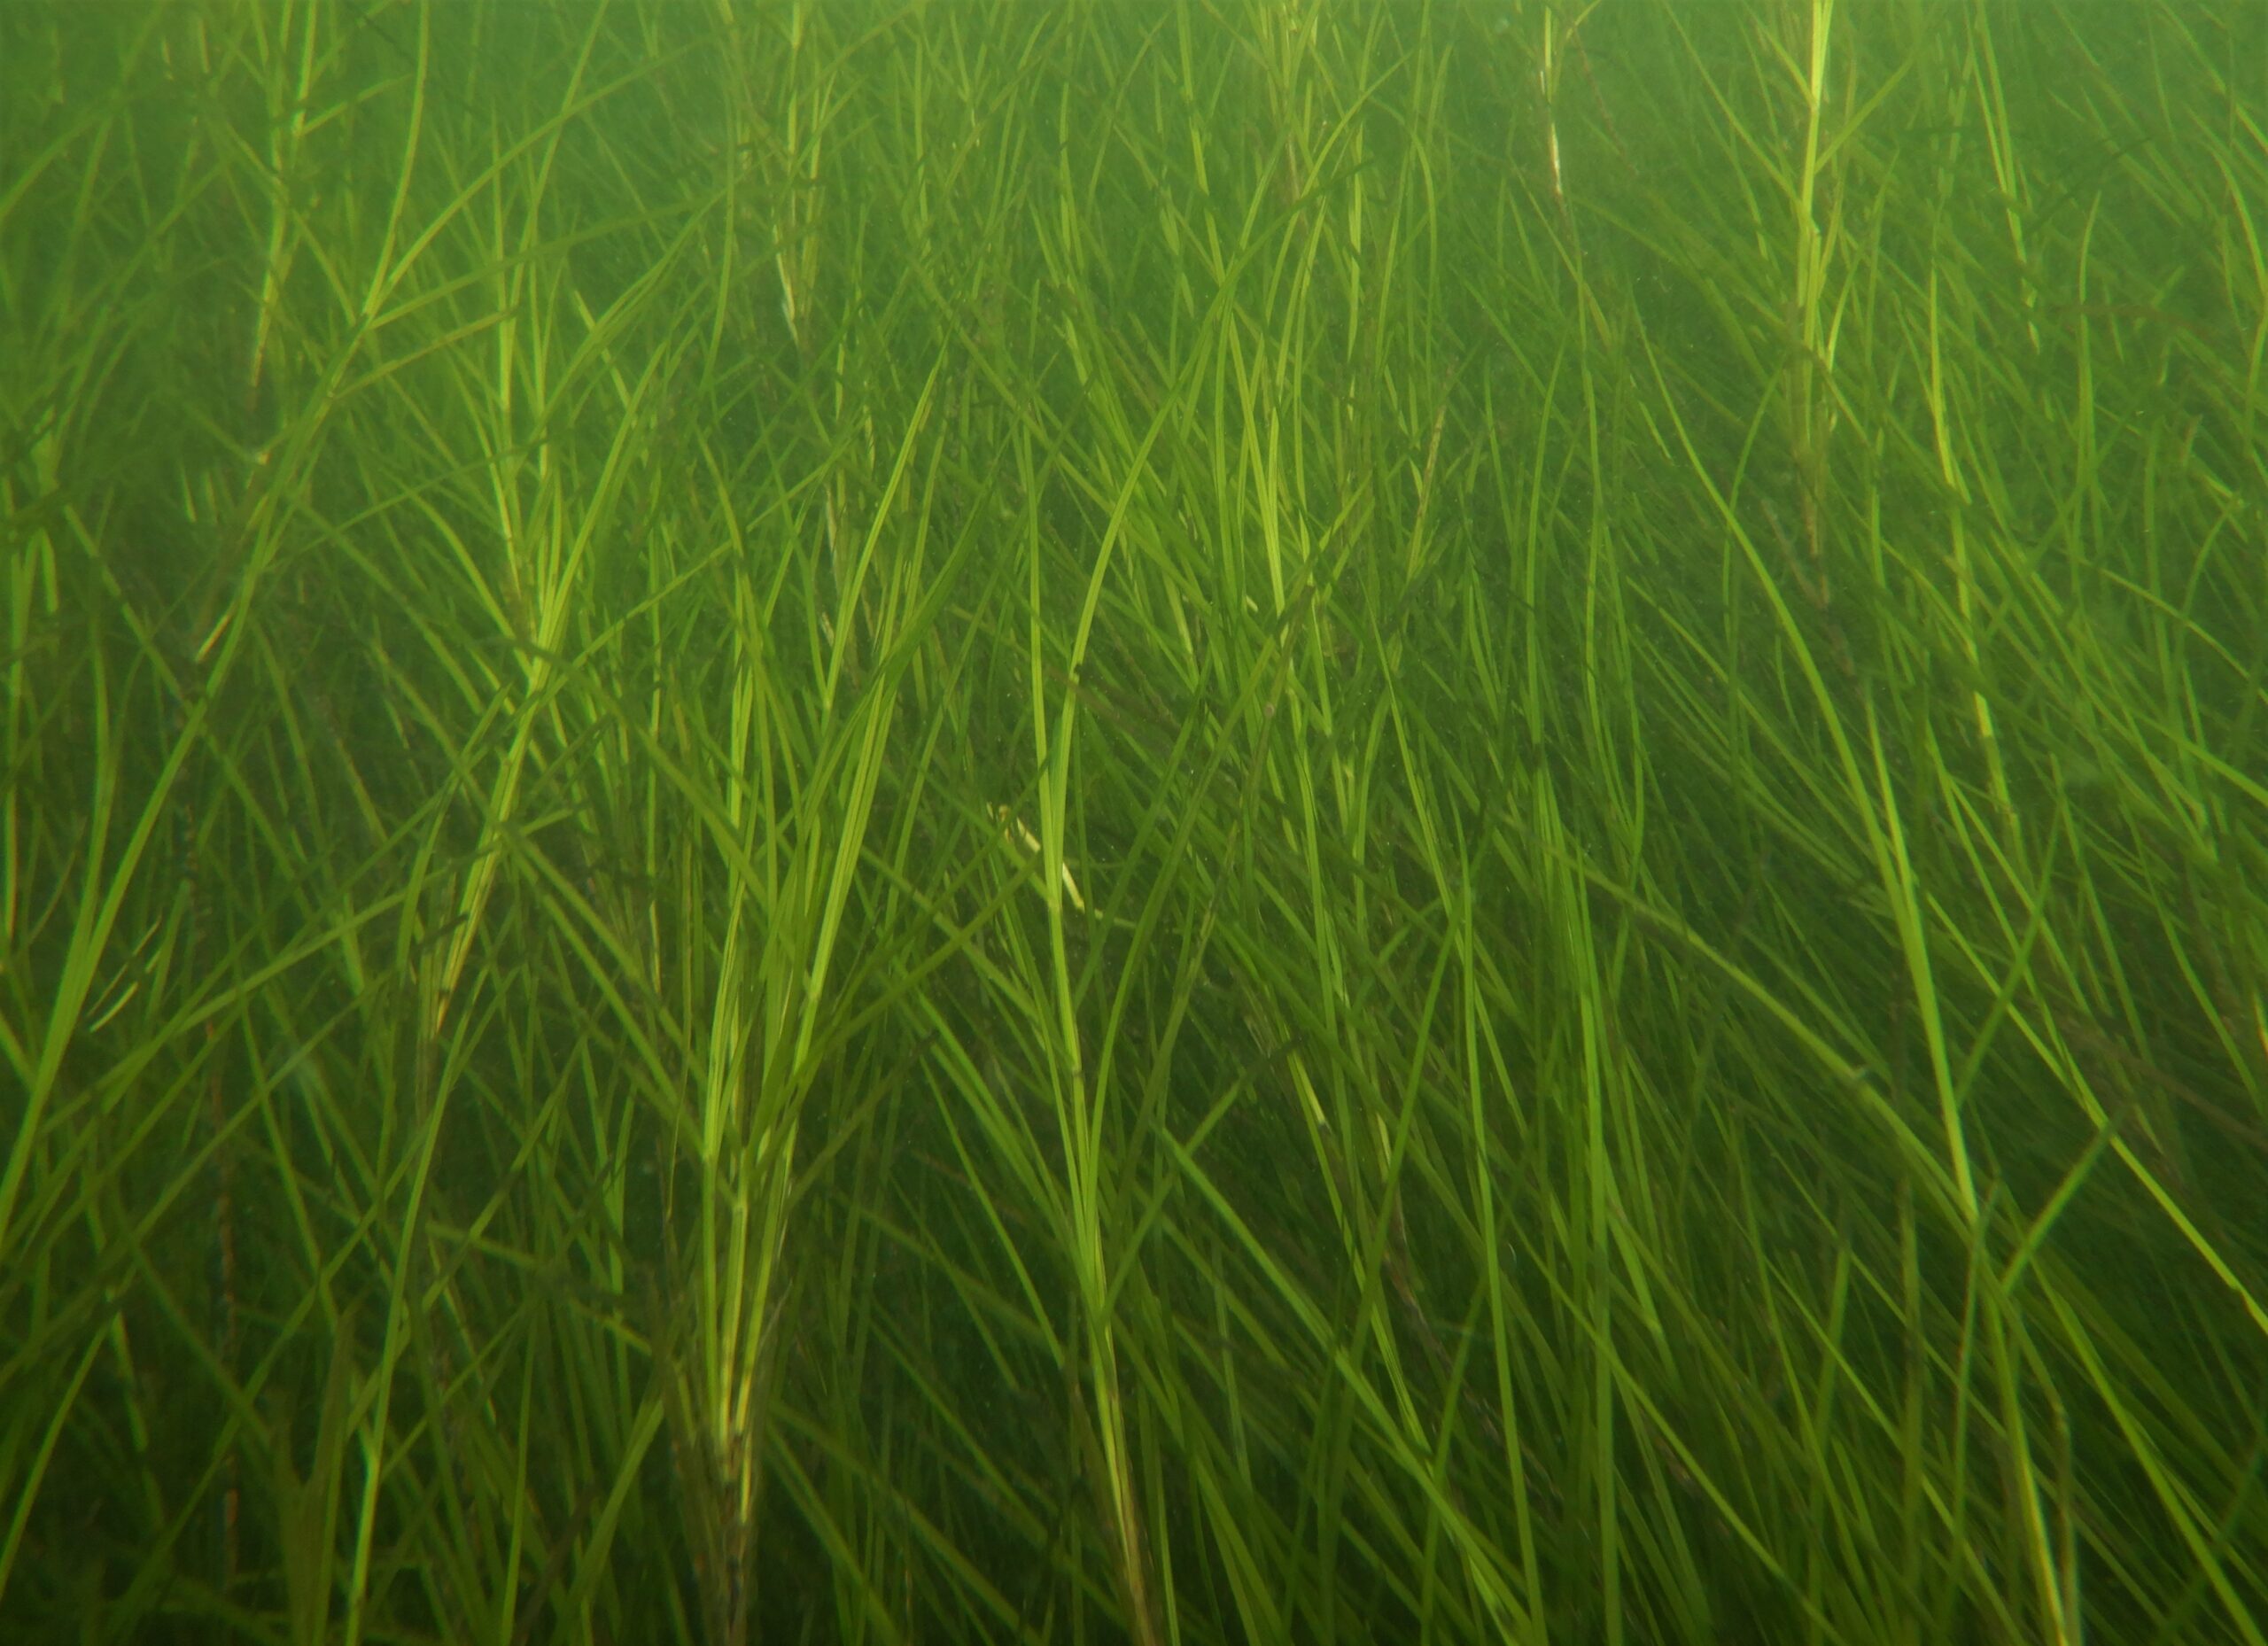 Visiting one of the worlds most remote seagrass meadows